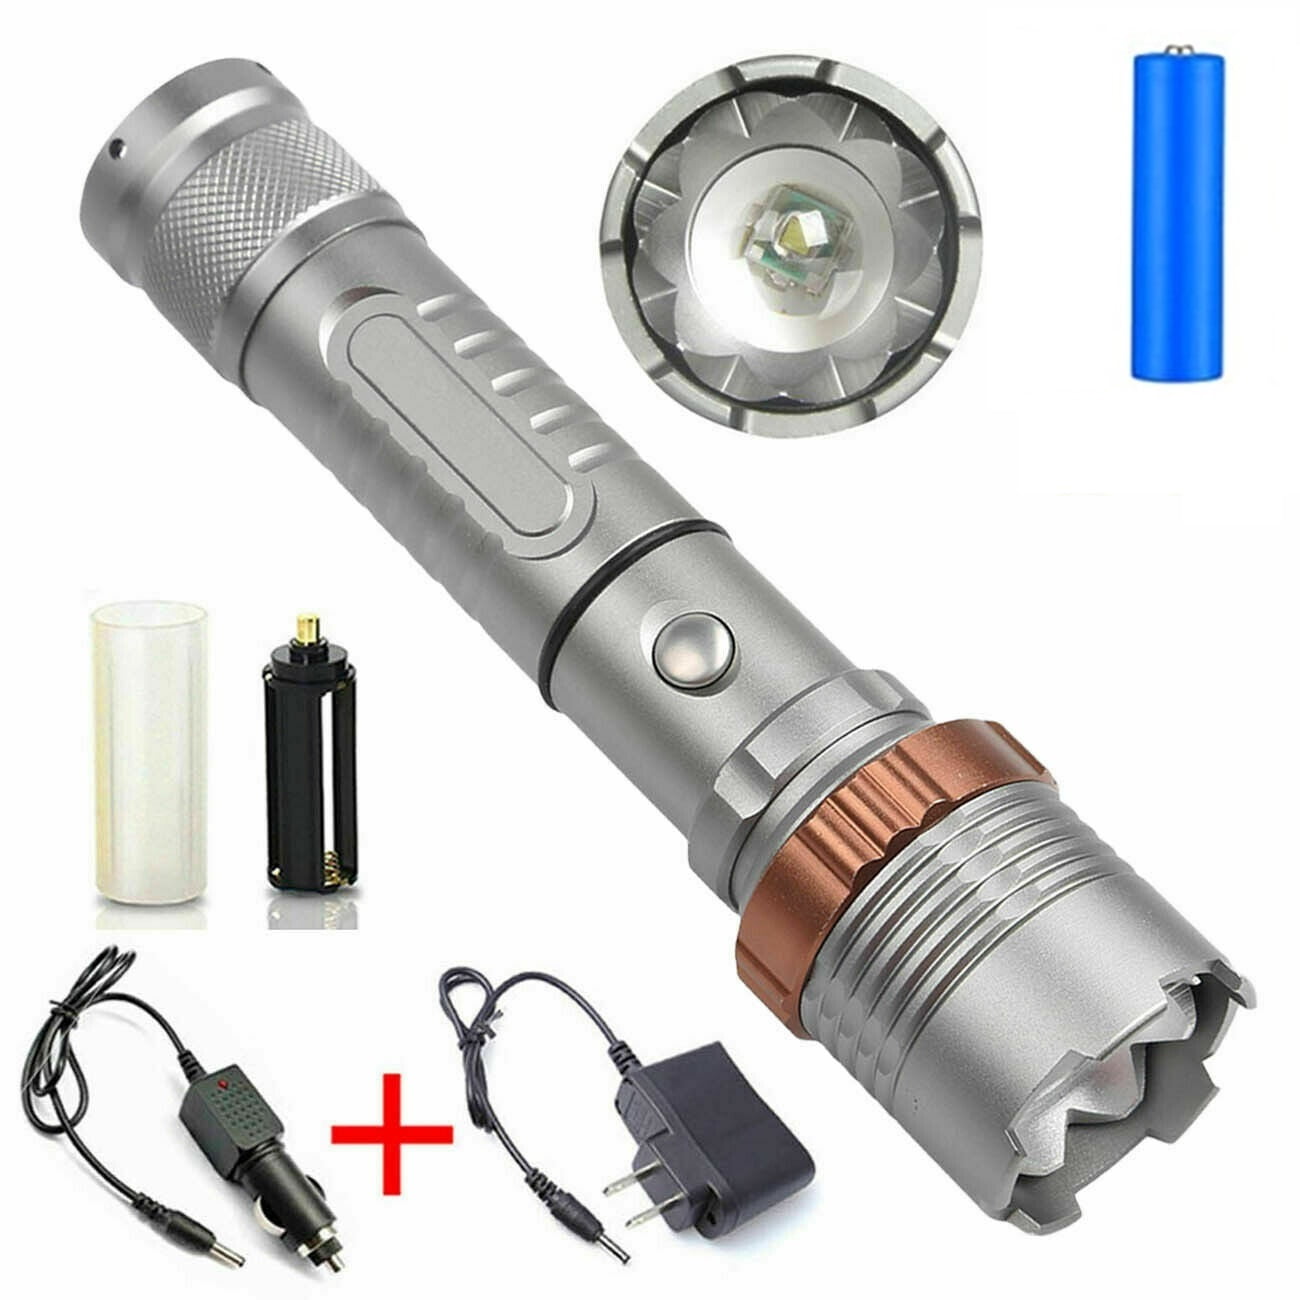 Waterproof Led Flashlight Q5 2000lm 3 Modes Zoomable Hot sale Self Defense 